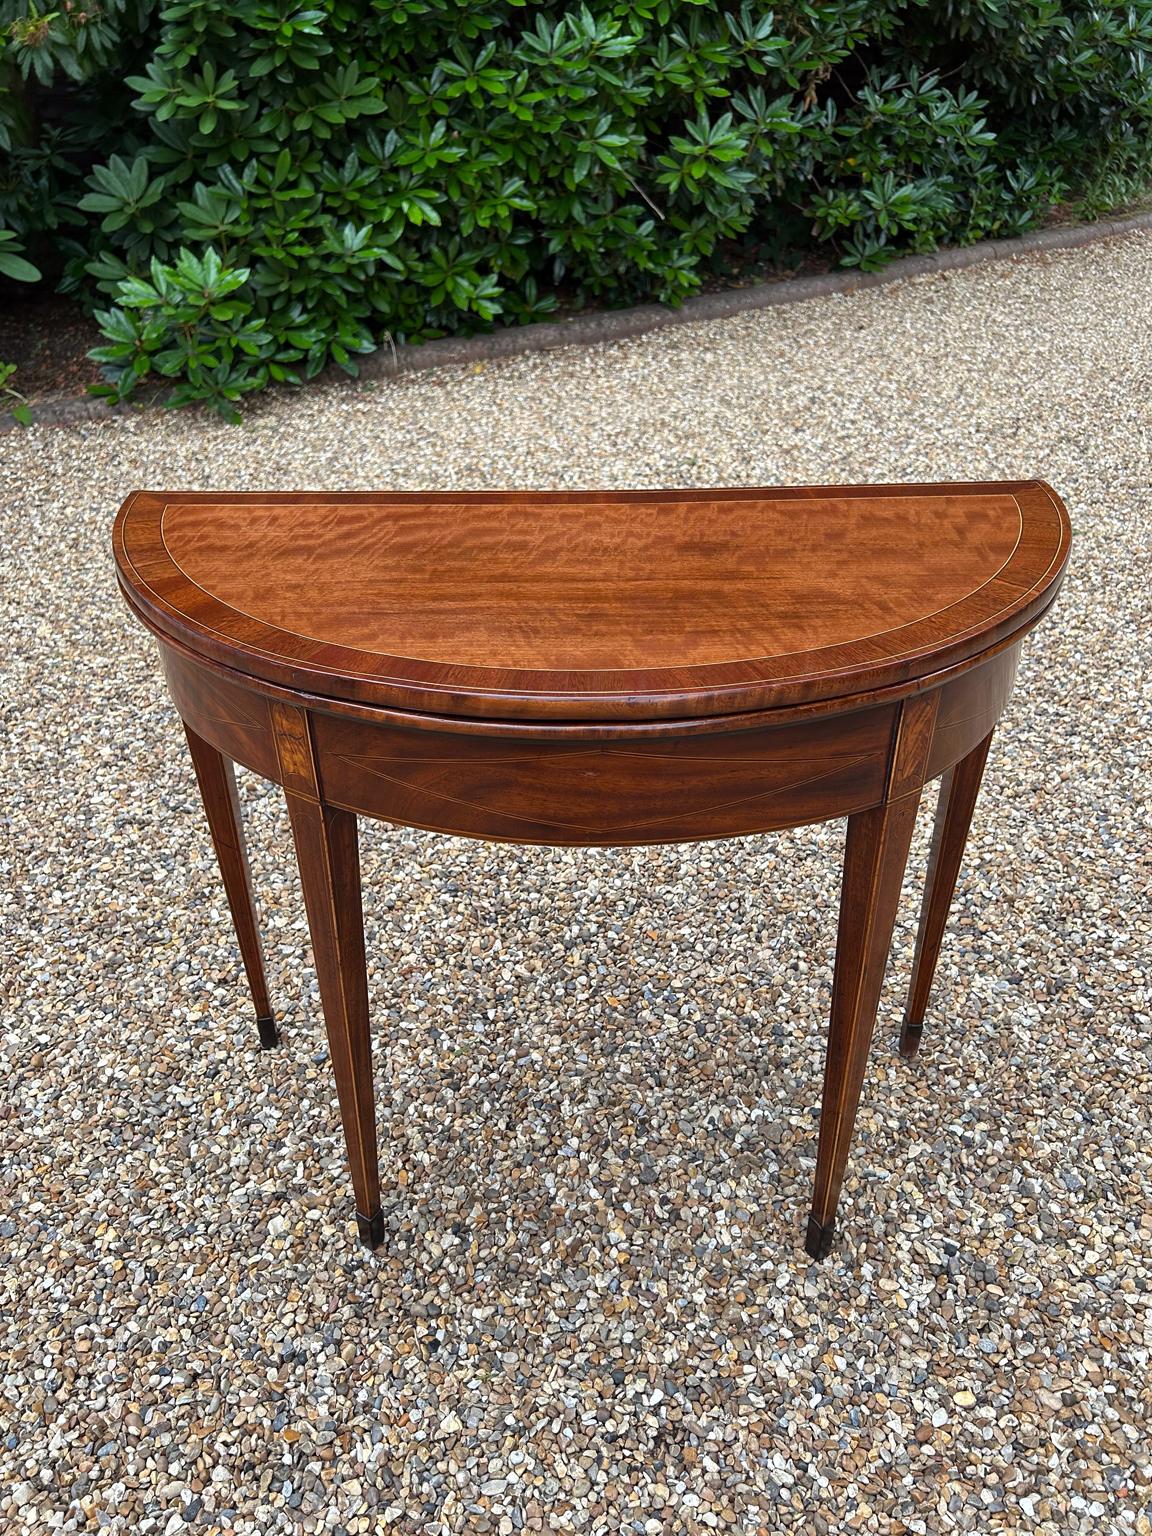 19th Century Georgian Mahogany Inlaid Demi Lune Card Table with a folding top lined with a green baize, crossbanded and line inlaid decoration on square tapering legs with spade feet.

Circa: 1820

Dimensions:
Height:   28.5 inches – 72 cms
Width:  